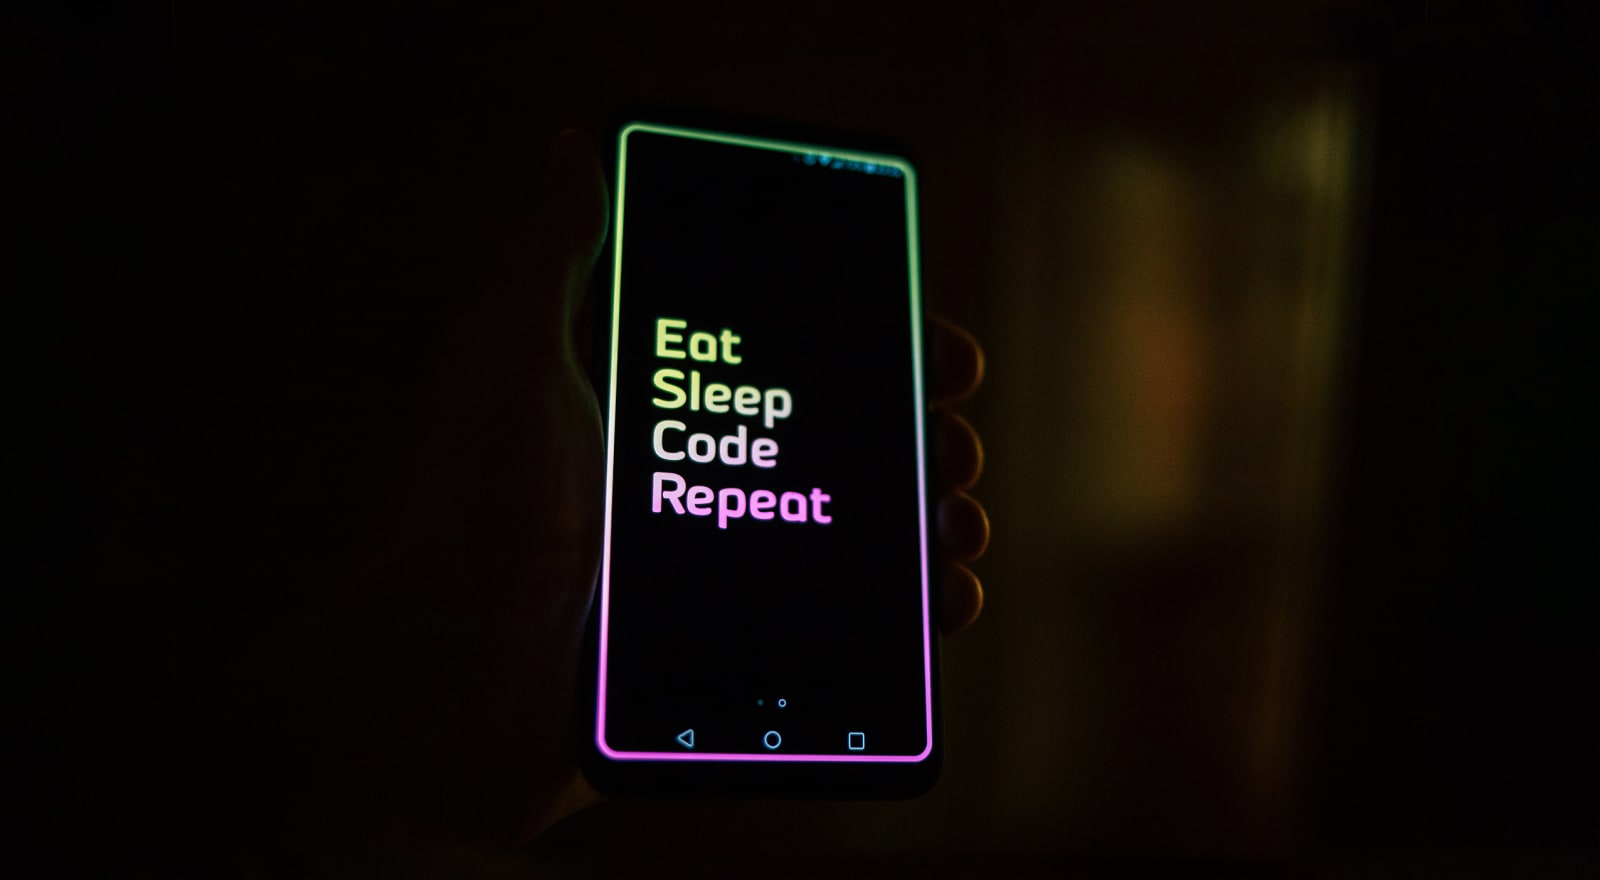 Mobile phone with 'Eat, Sleep, Code, Repeat' message on it